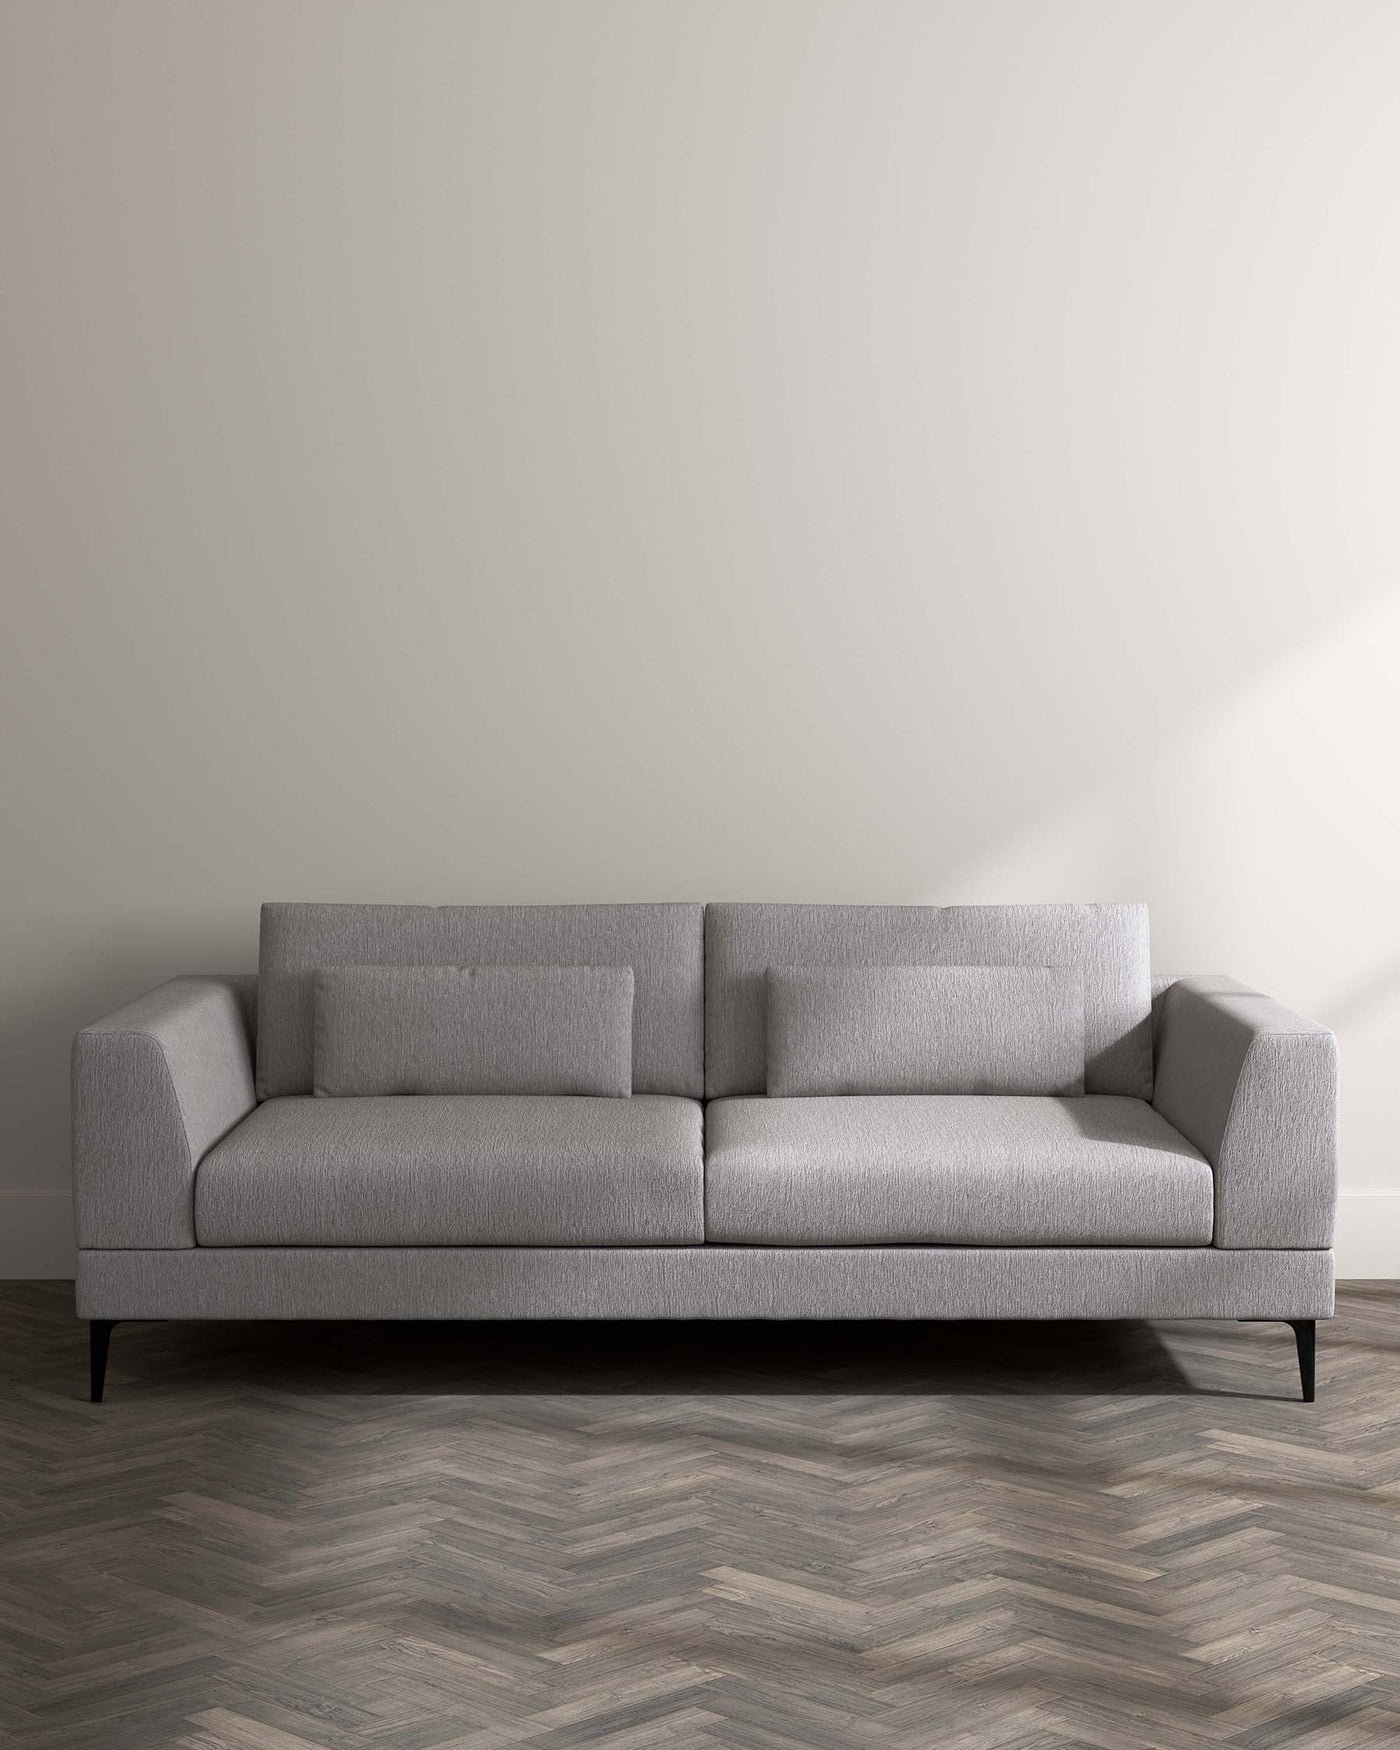 A contemporary light grey fabric sofa with clean lines, featuring plush back cushions, a tufted seat, and angular armrests, raised on slender black metal legs.